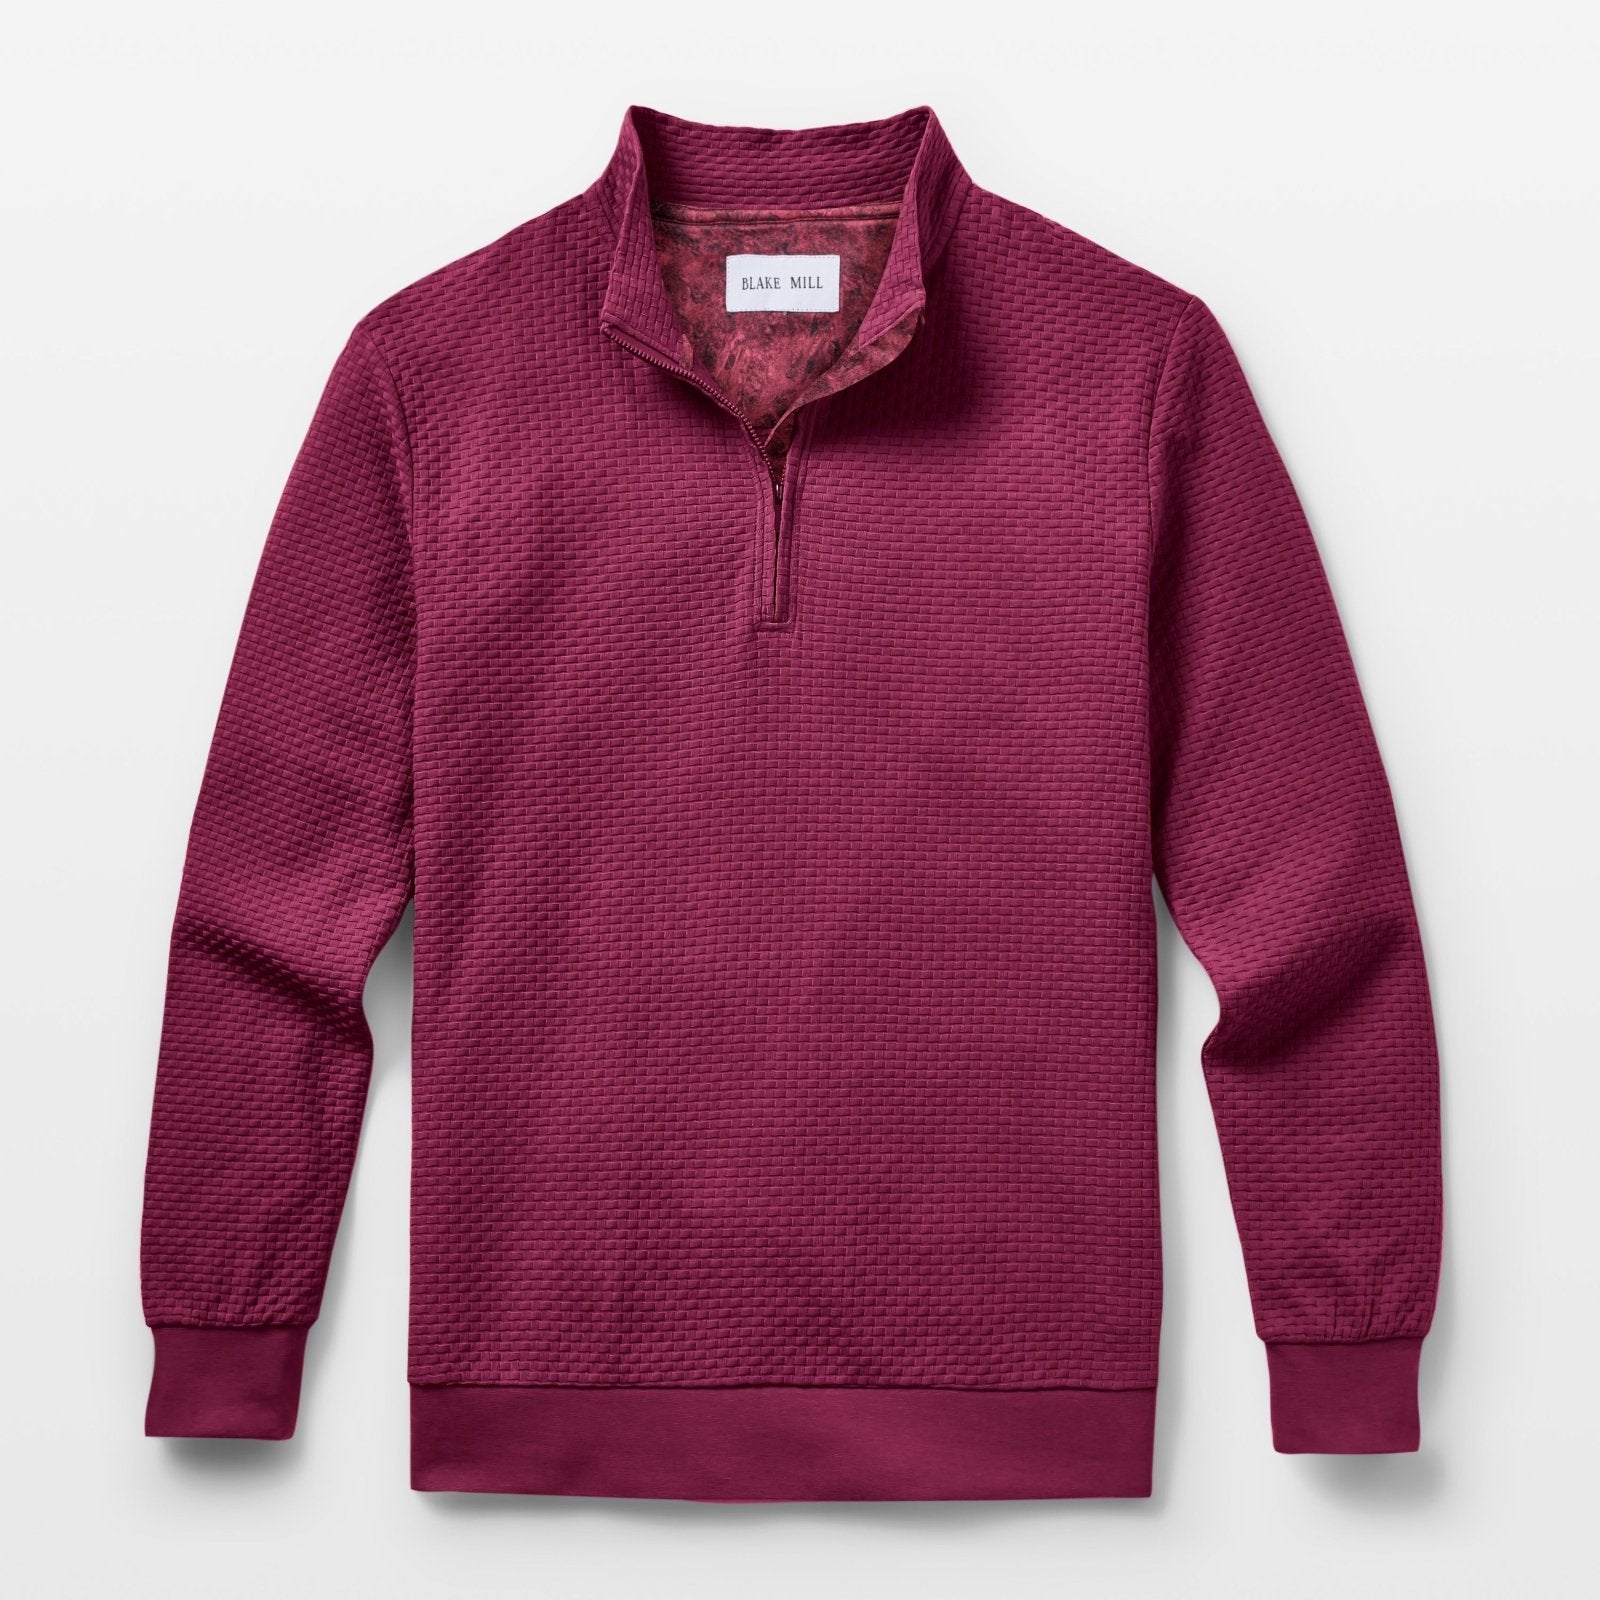 Plum with Times March Quarter Zip Jersey - Blake Mill